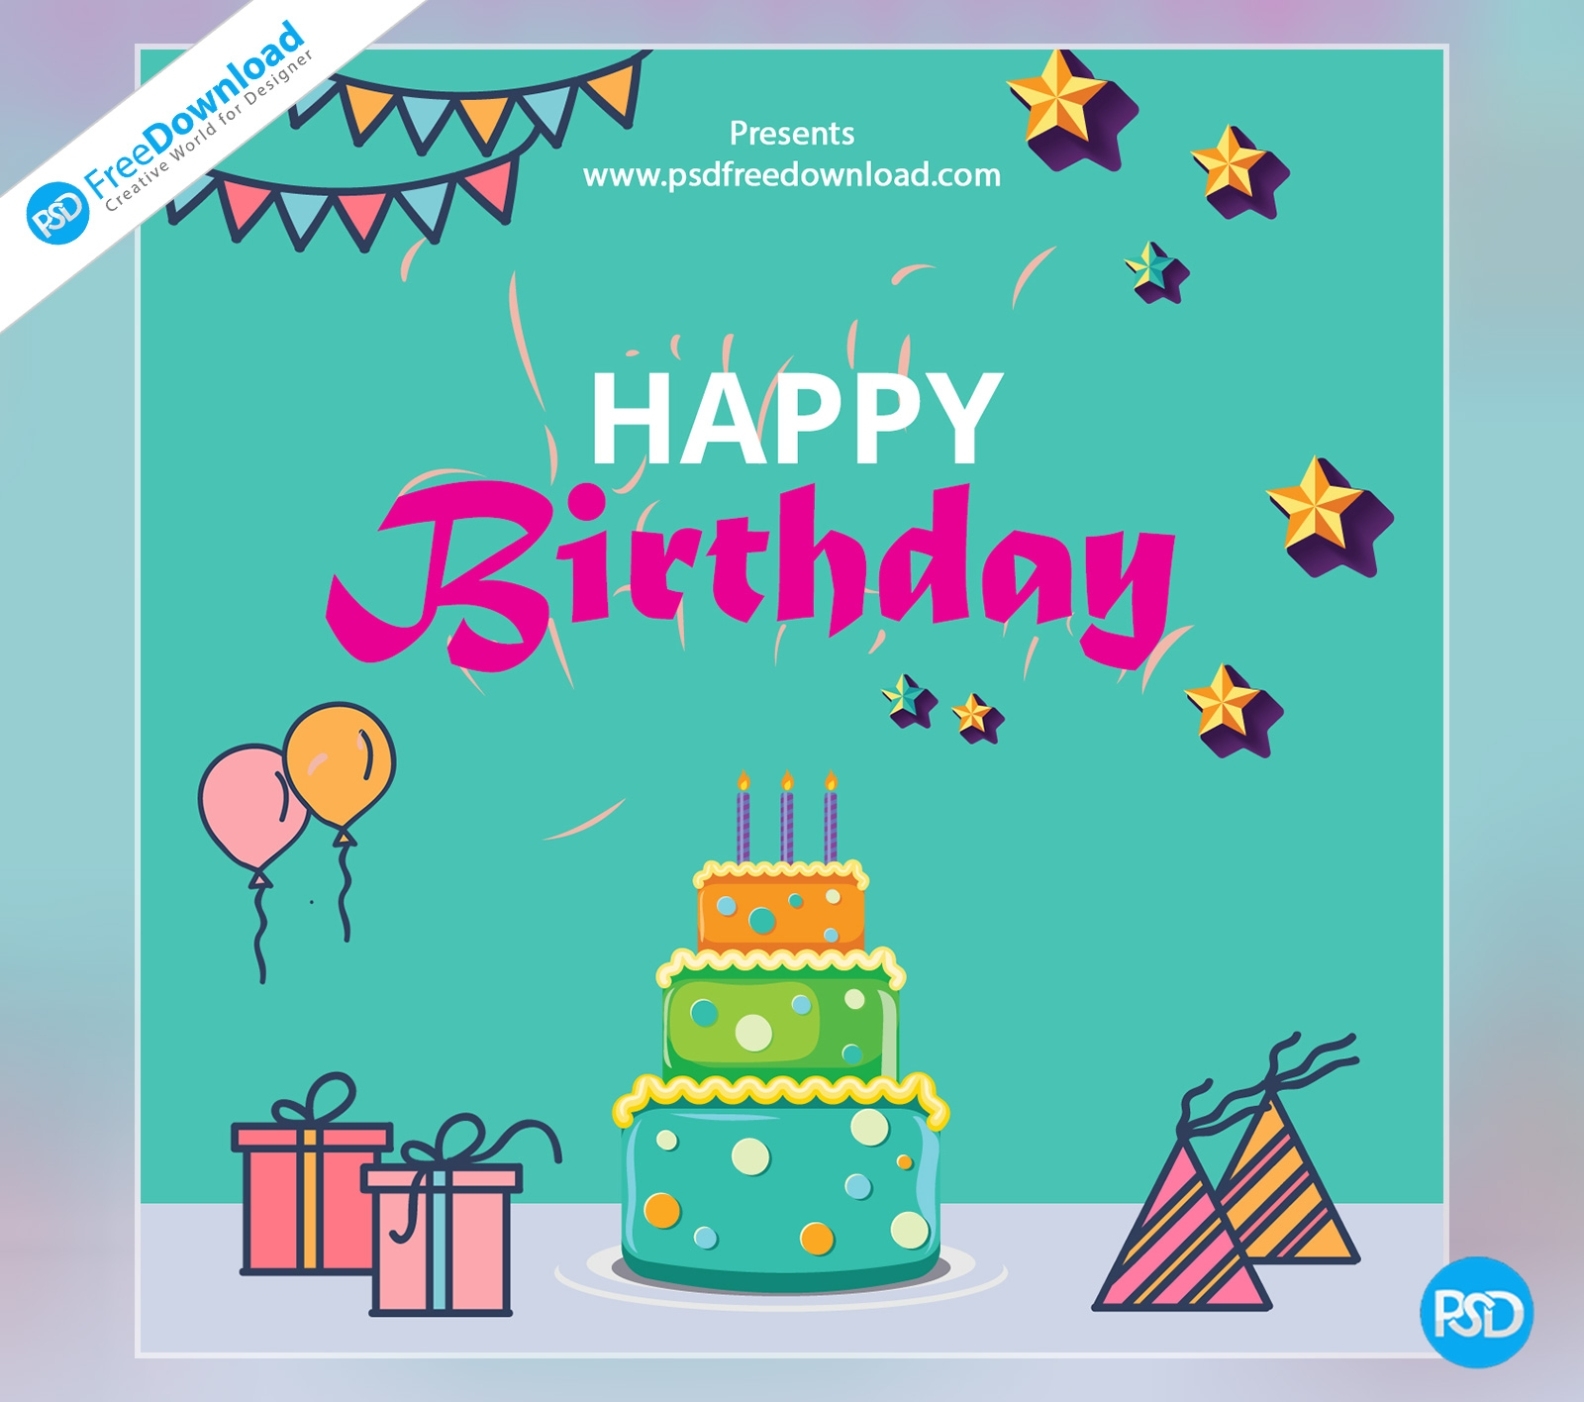 Happy Birthday Template Greeting Card - Psd Free Download Within Template For Anniversary Card